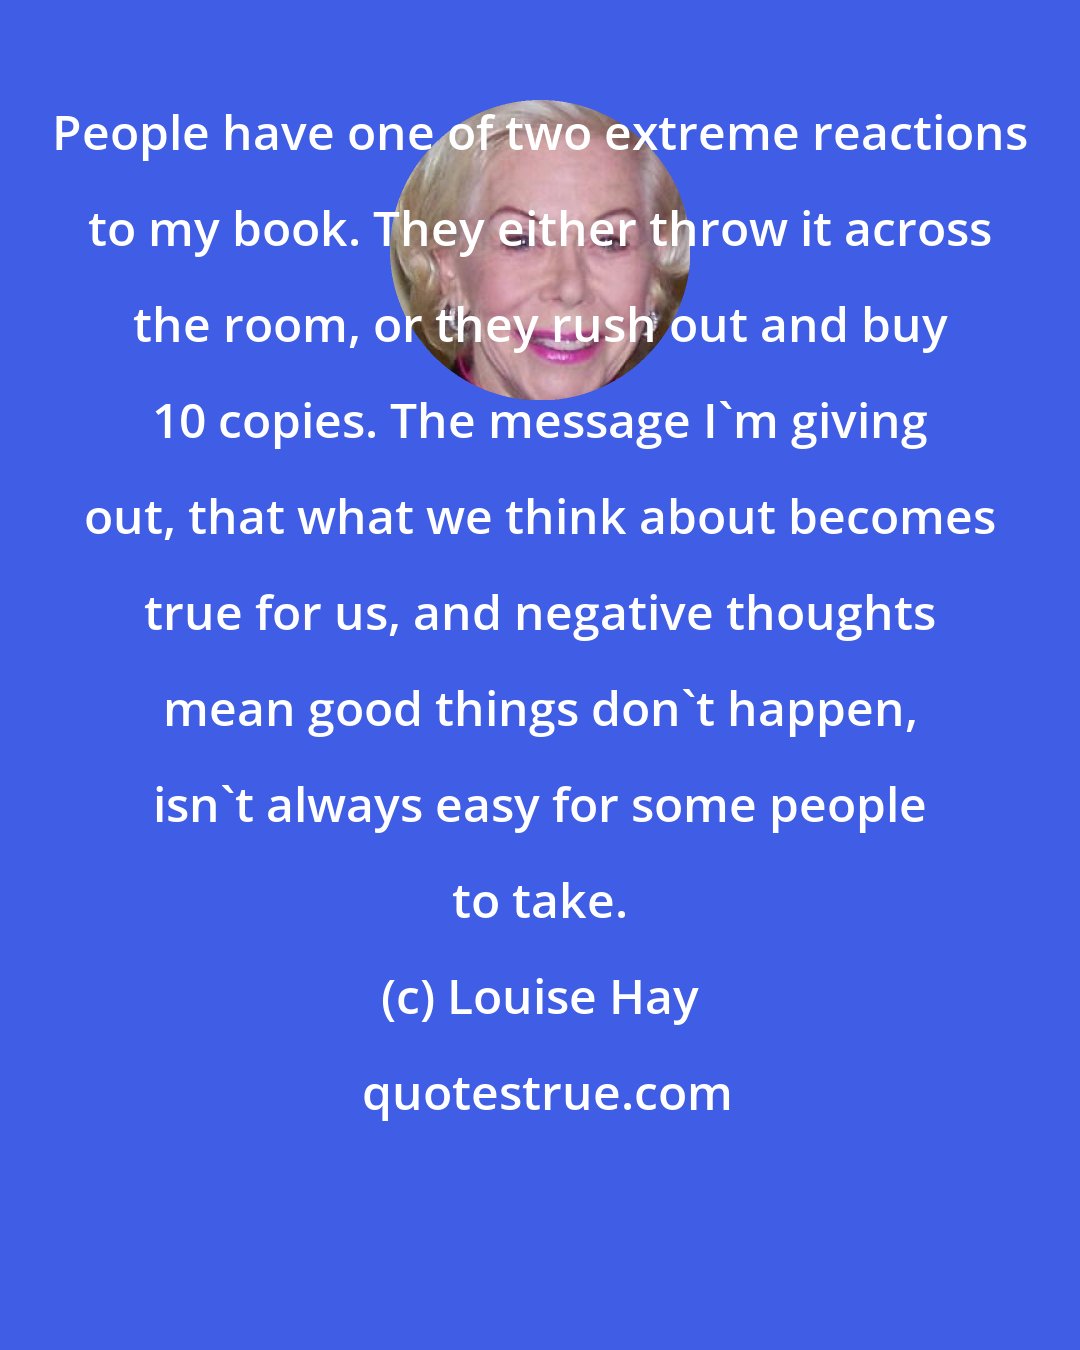 Louise Hay: People have one of two extreme reactions to my book. They either throw it across the room, or they rush out and buy 10 copies. The message I'm giving out, that what we think about becomes true for us, and negative thoughts mean good things don't happen, isn't always easy for some people to take.